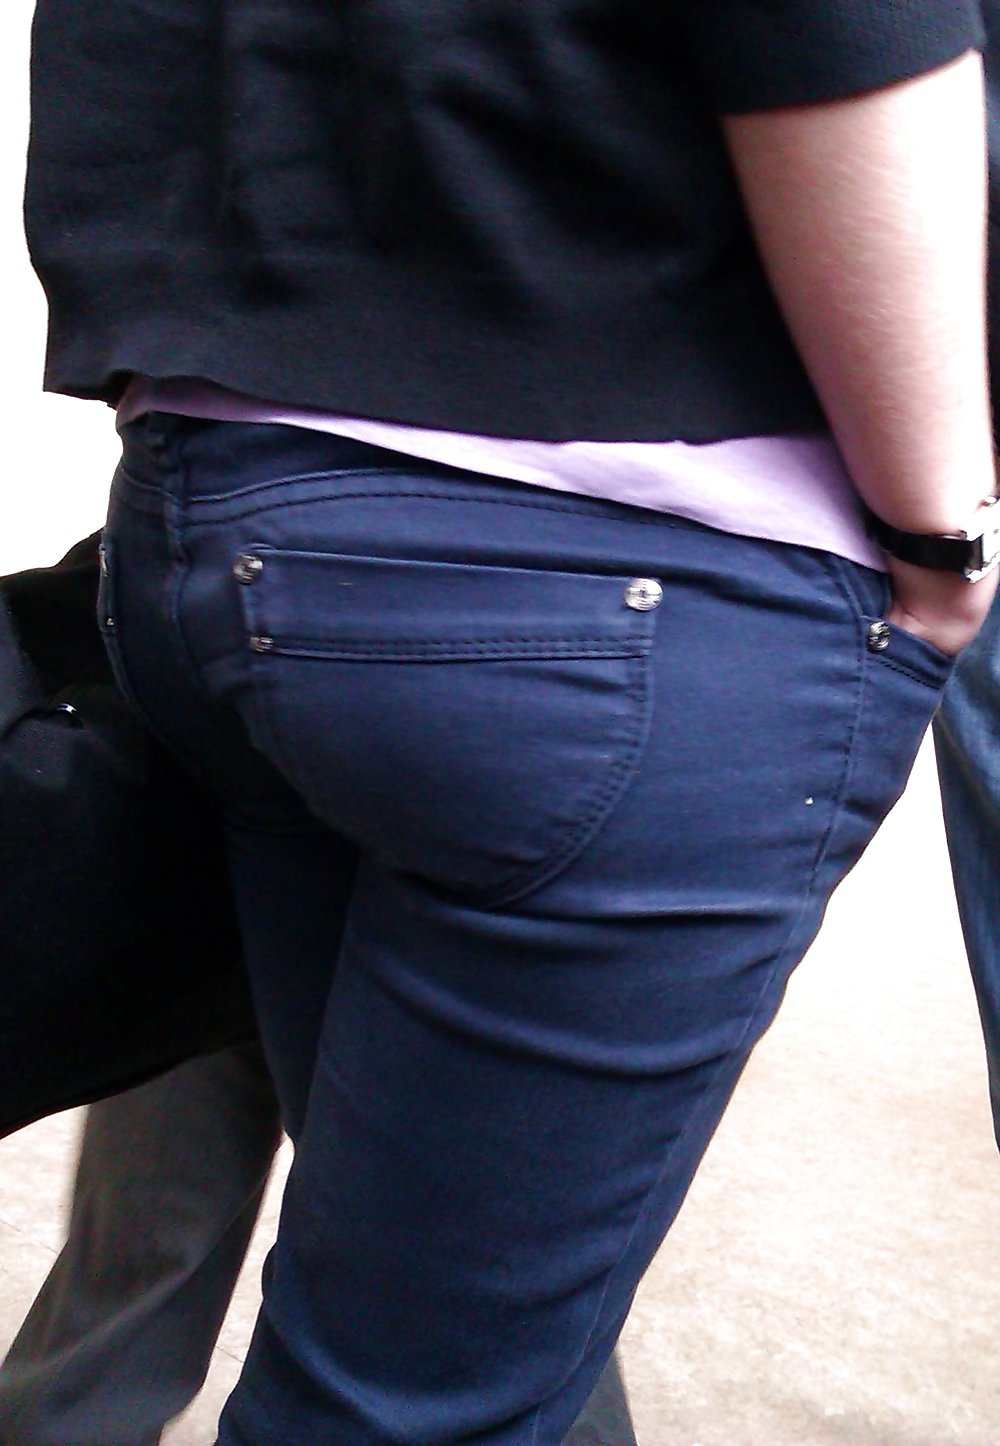 Candid teen ass in jeans #23904563